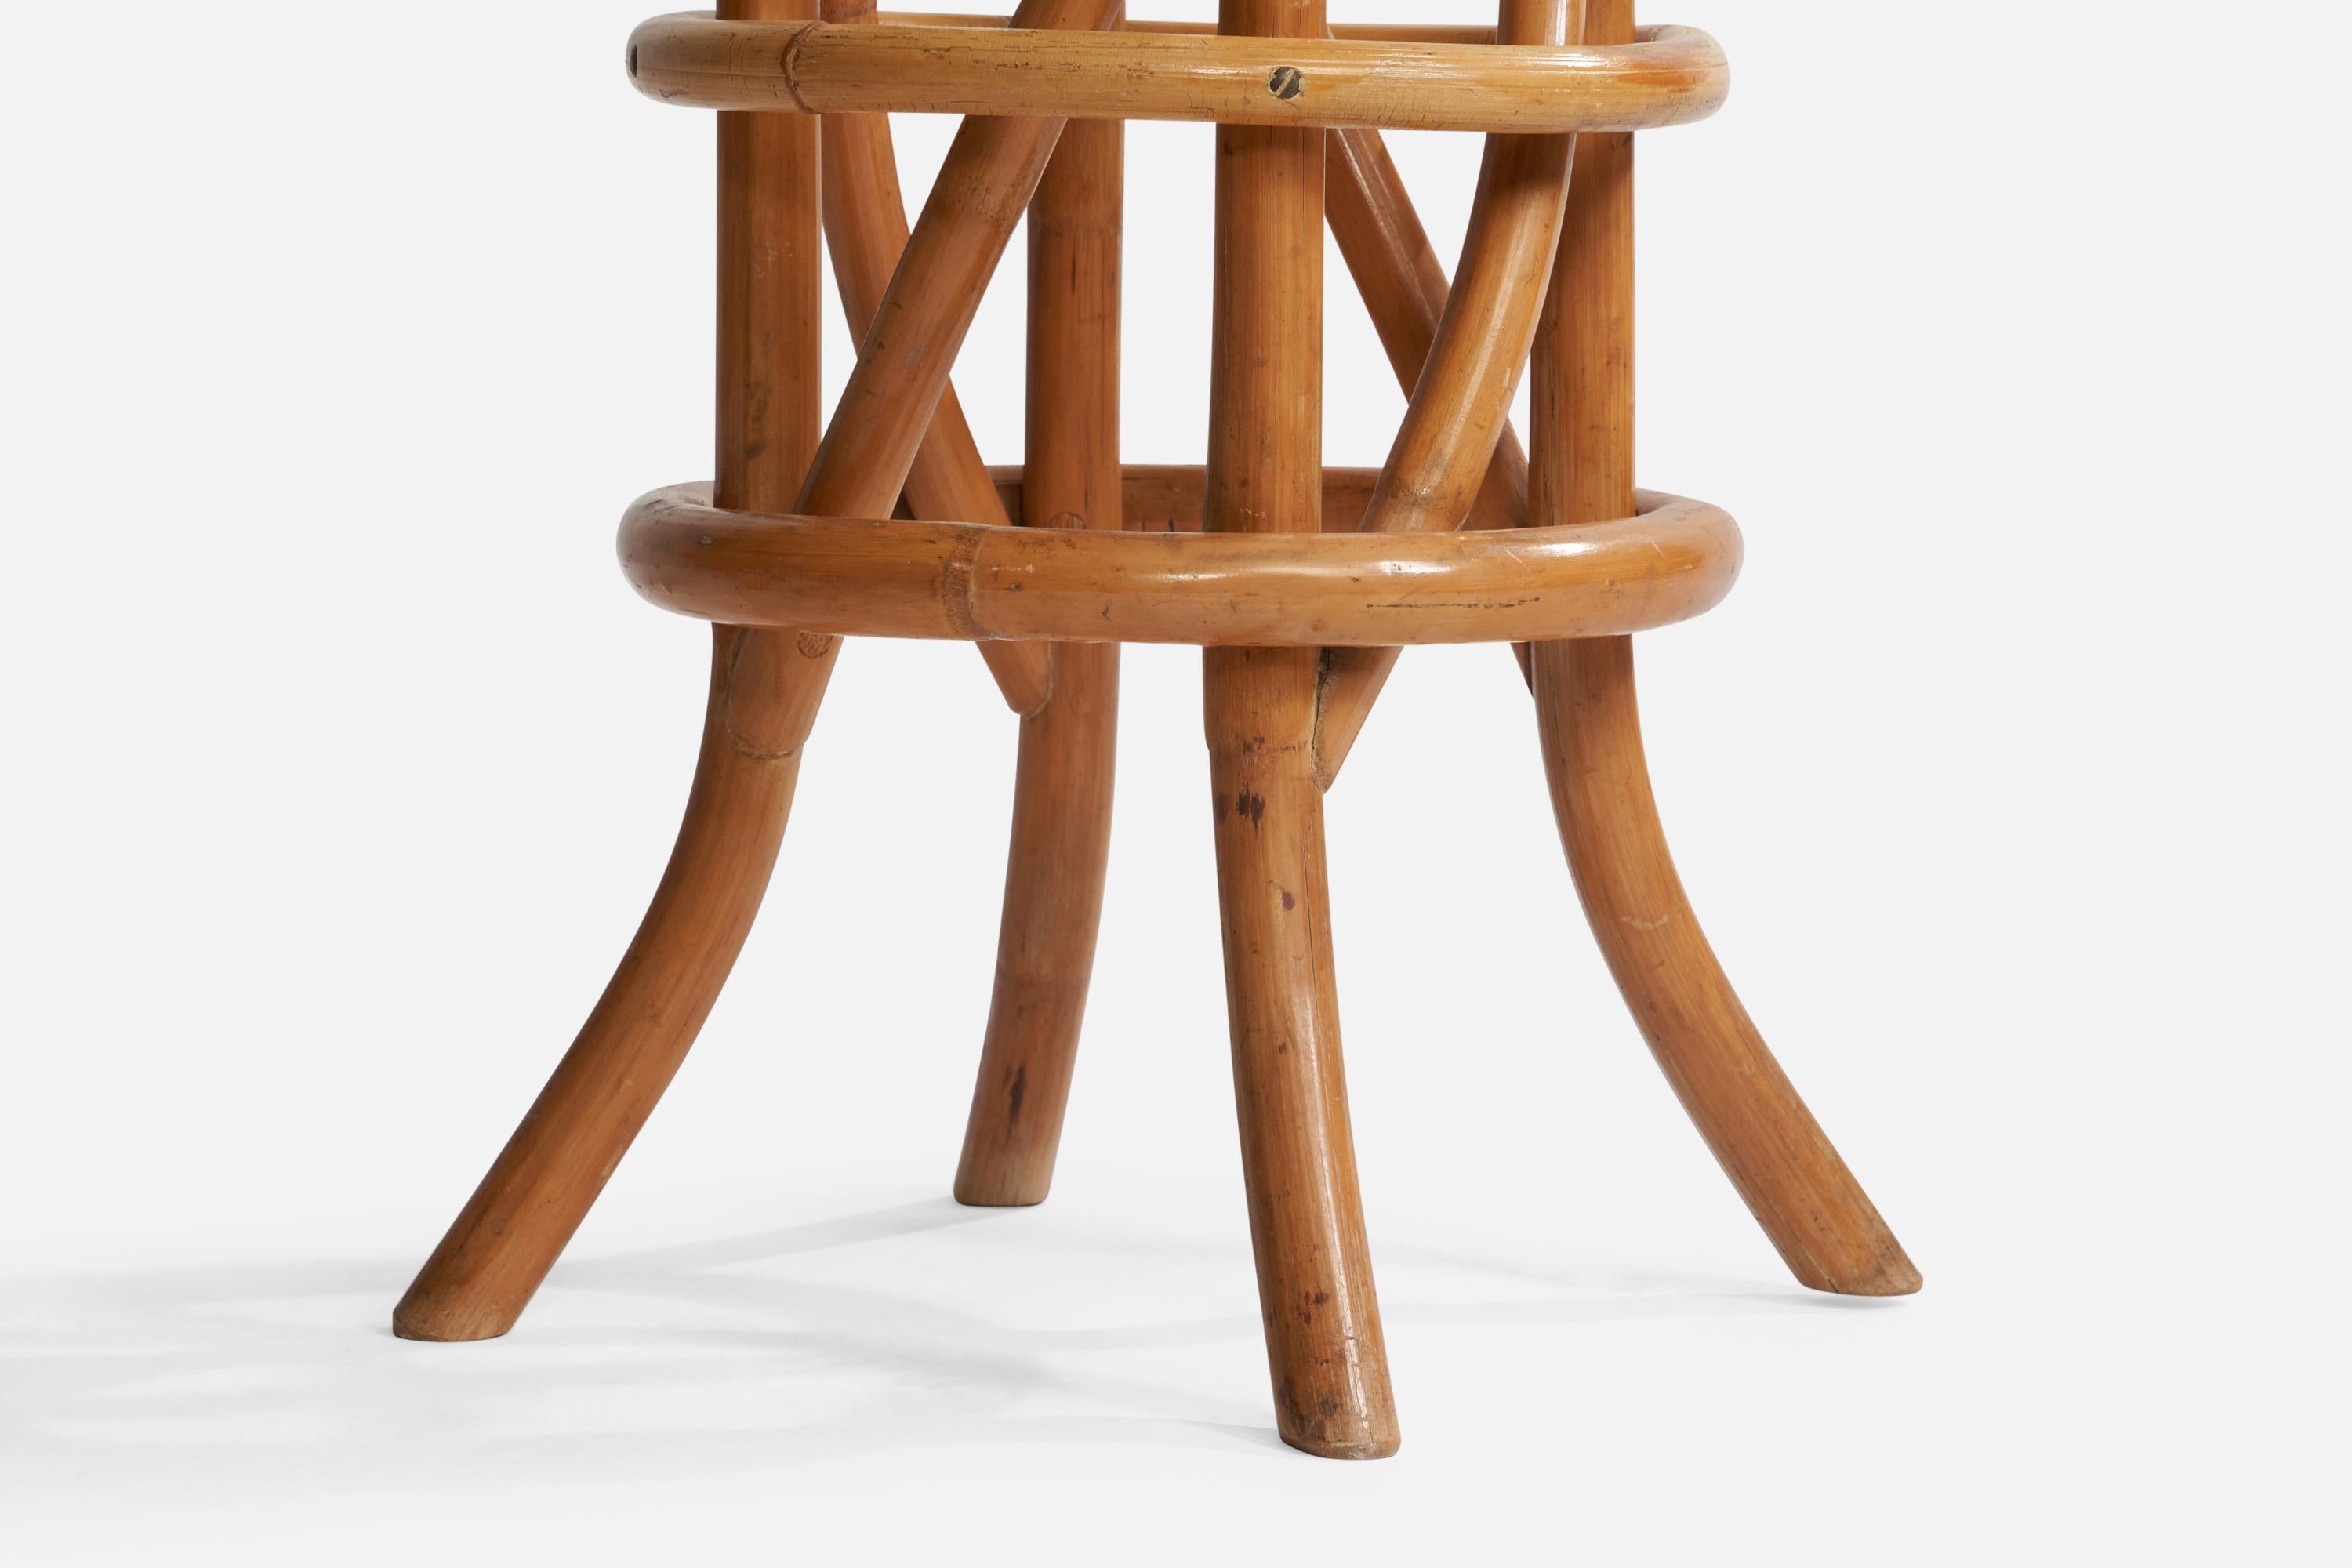 Mid-20th Century American Designer, Bar Stools, Bamboo, Mohair, USA, 1950s For Sale